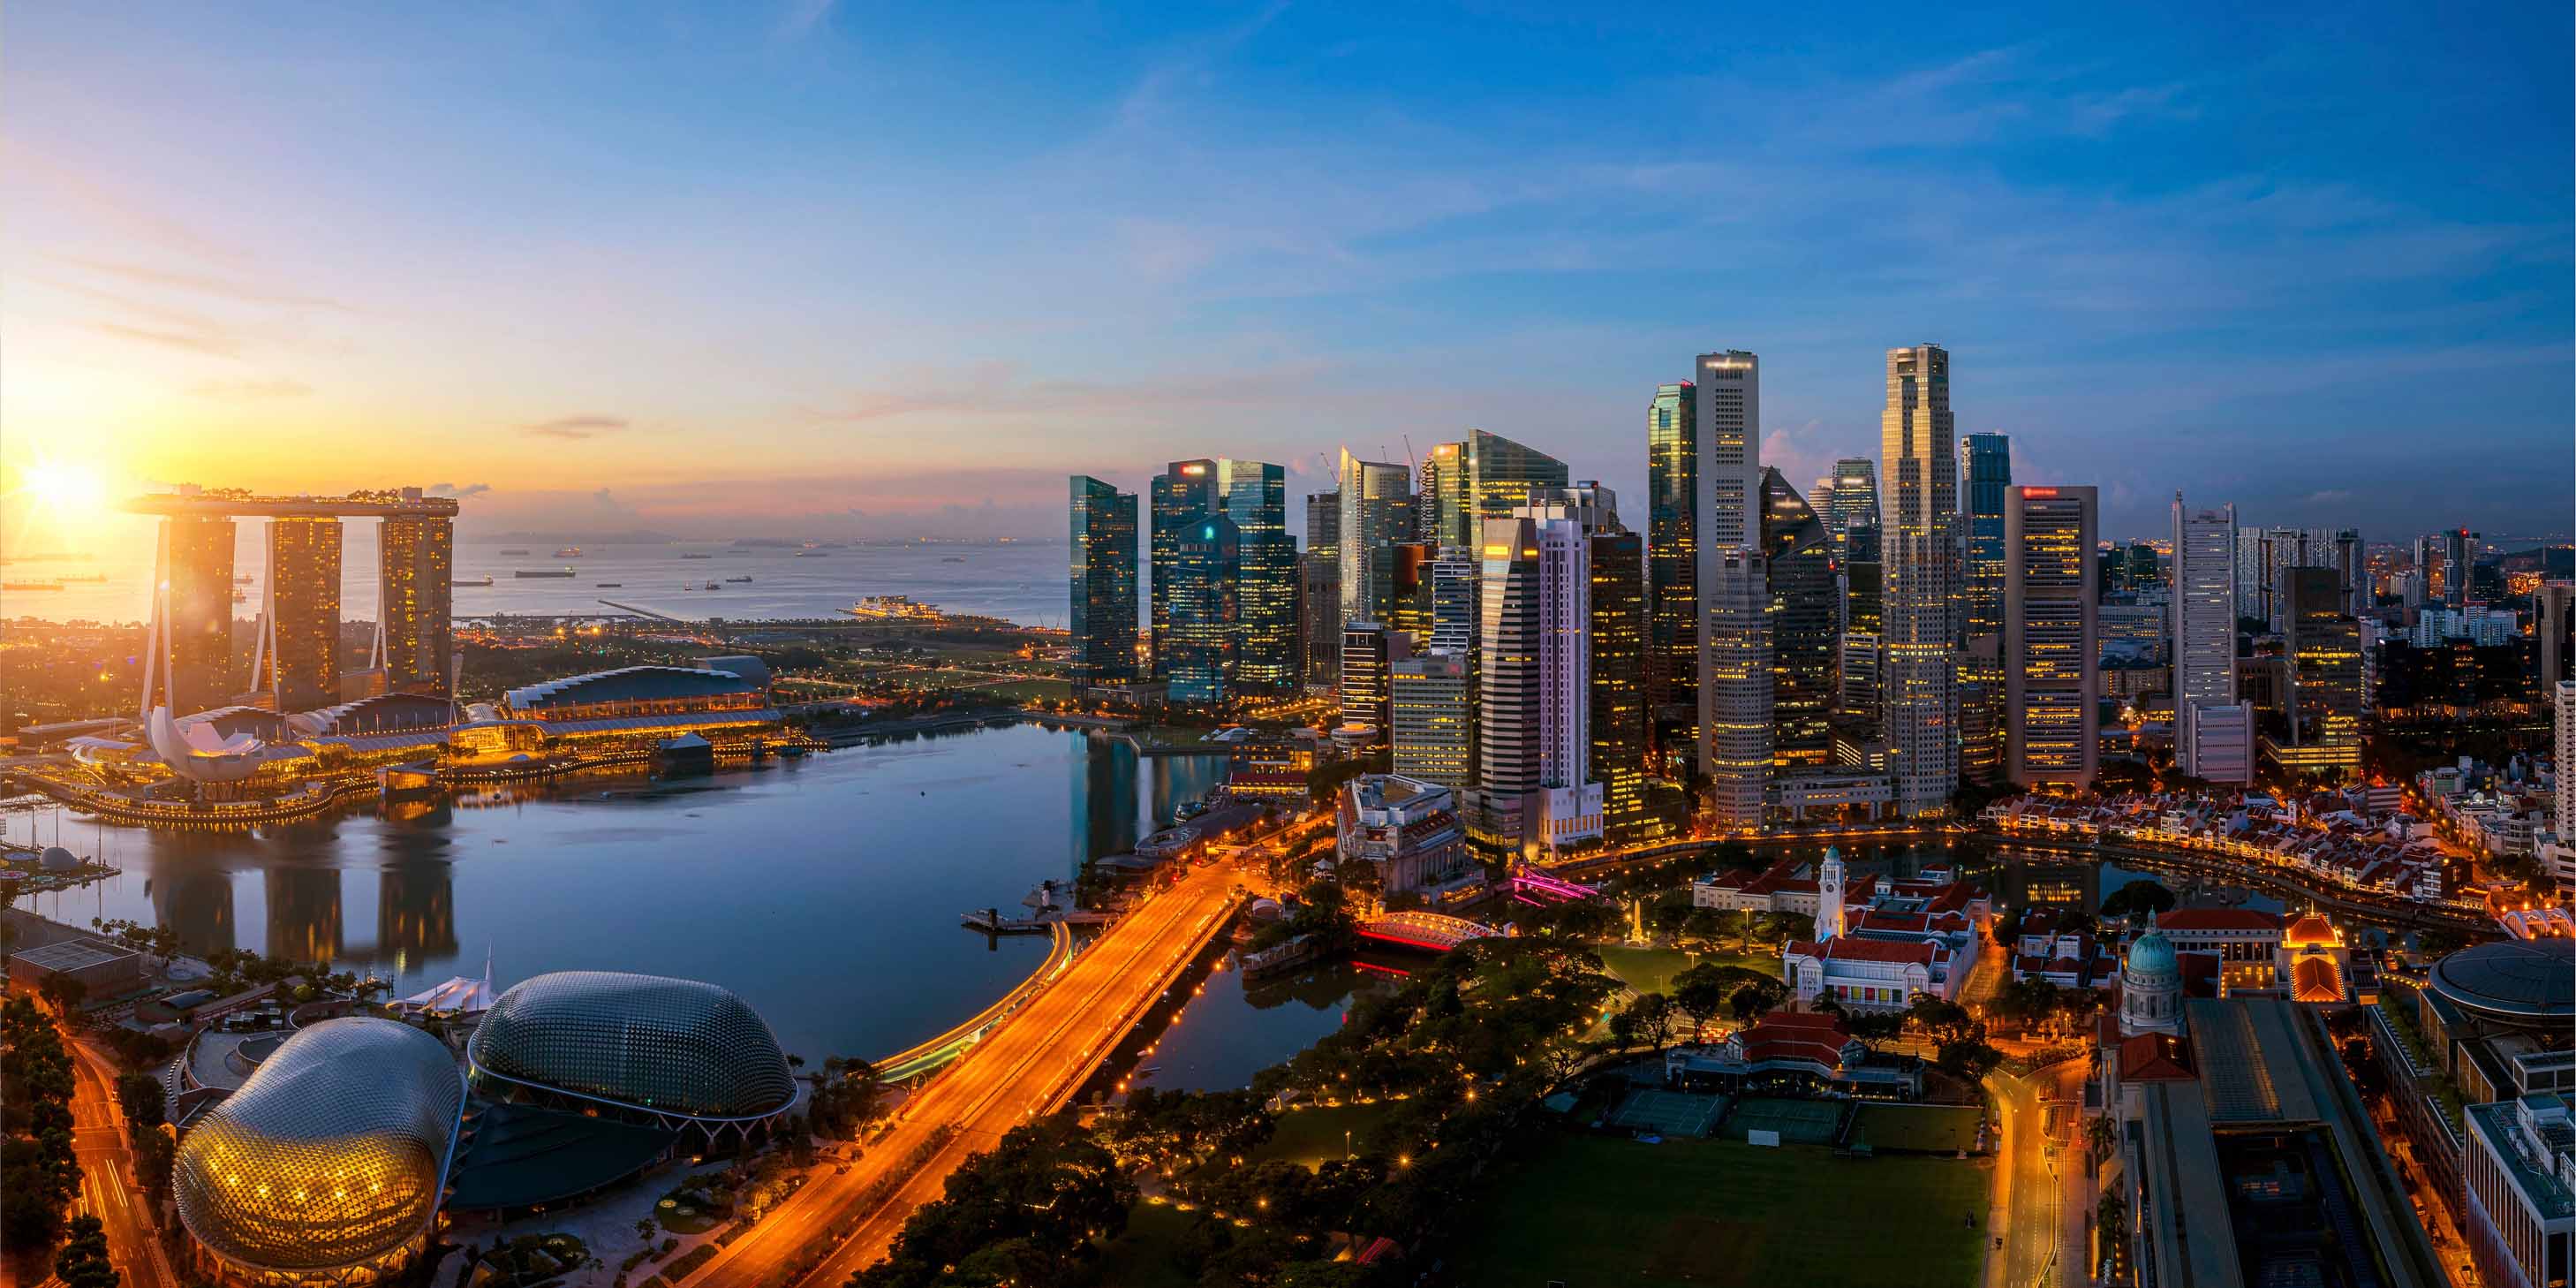  Singapore skyline at sunrise, with high-rise buildings and the streets below with an orange glow